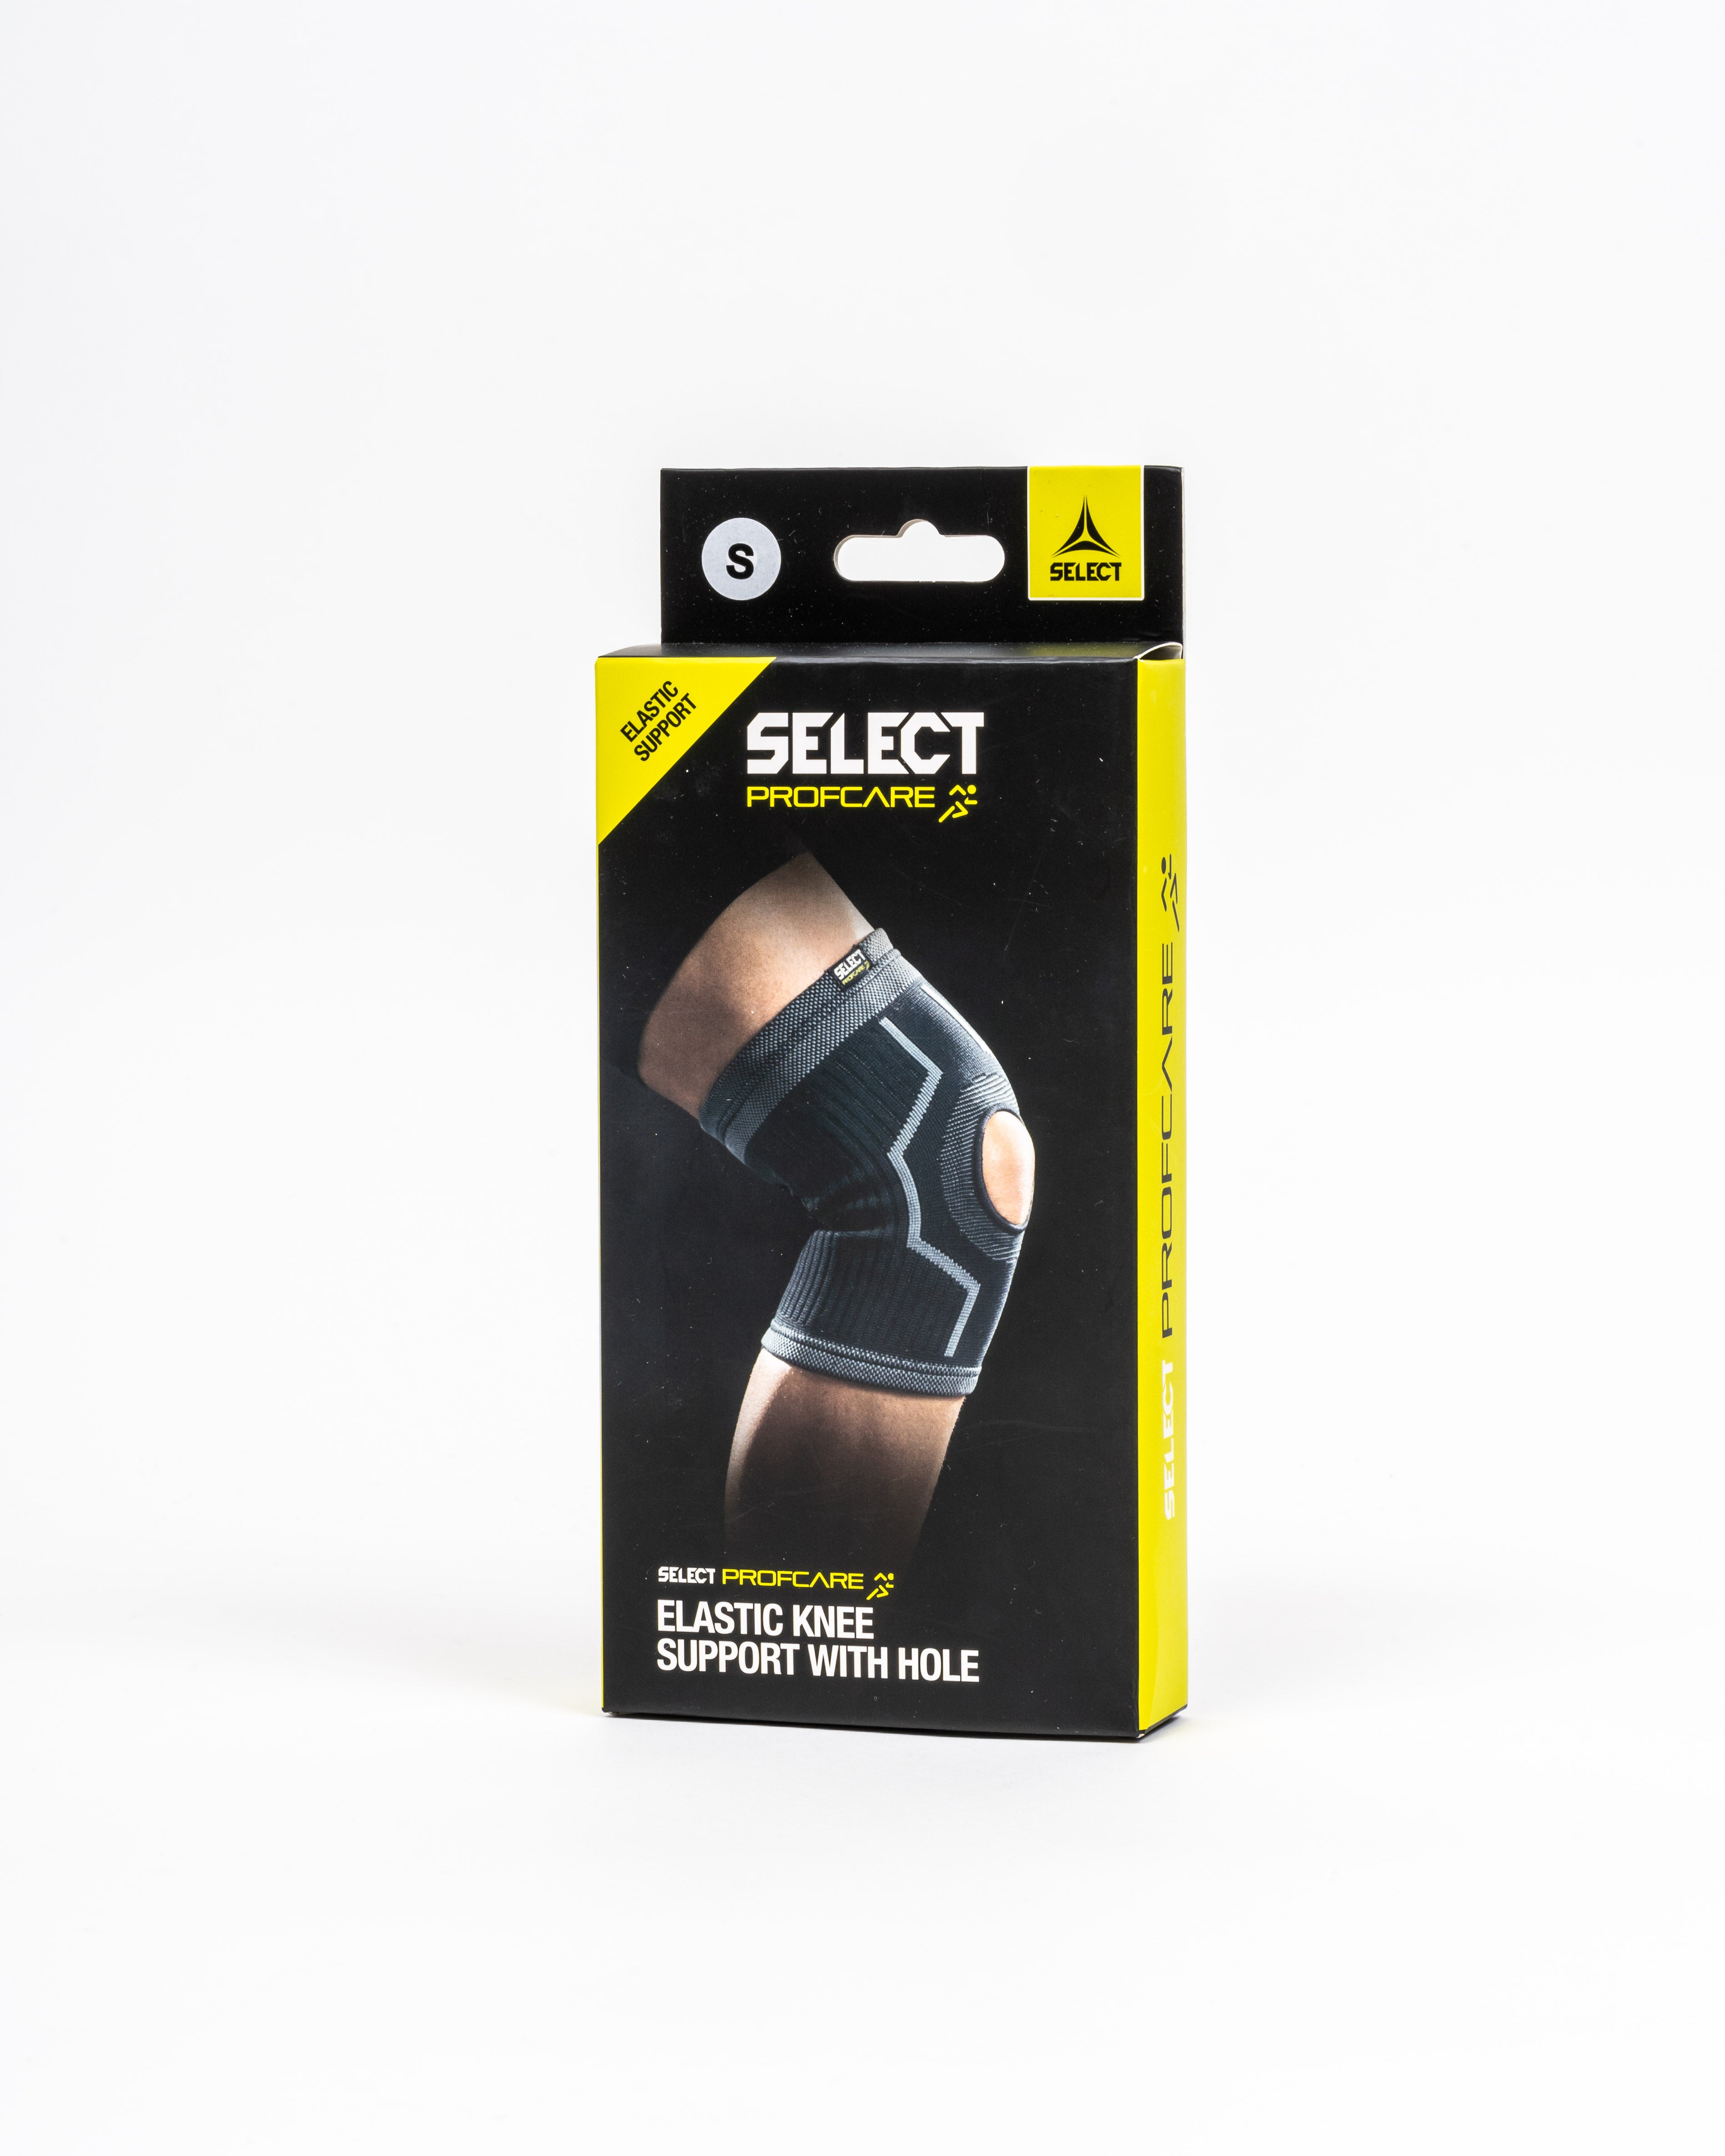 Select Procare Elastic Knee Support With Hole